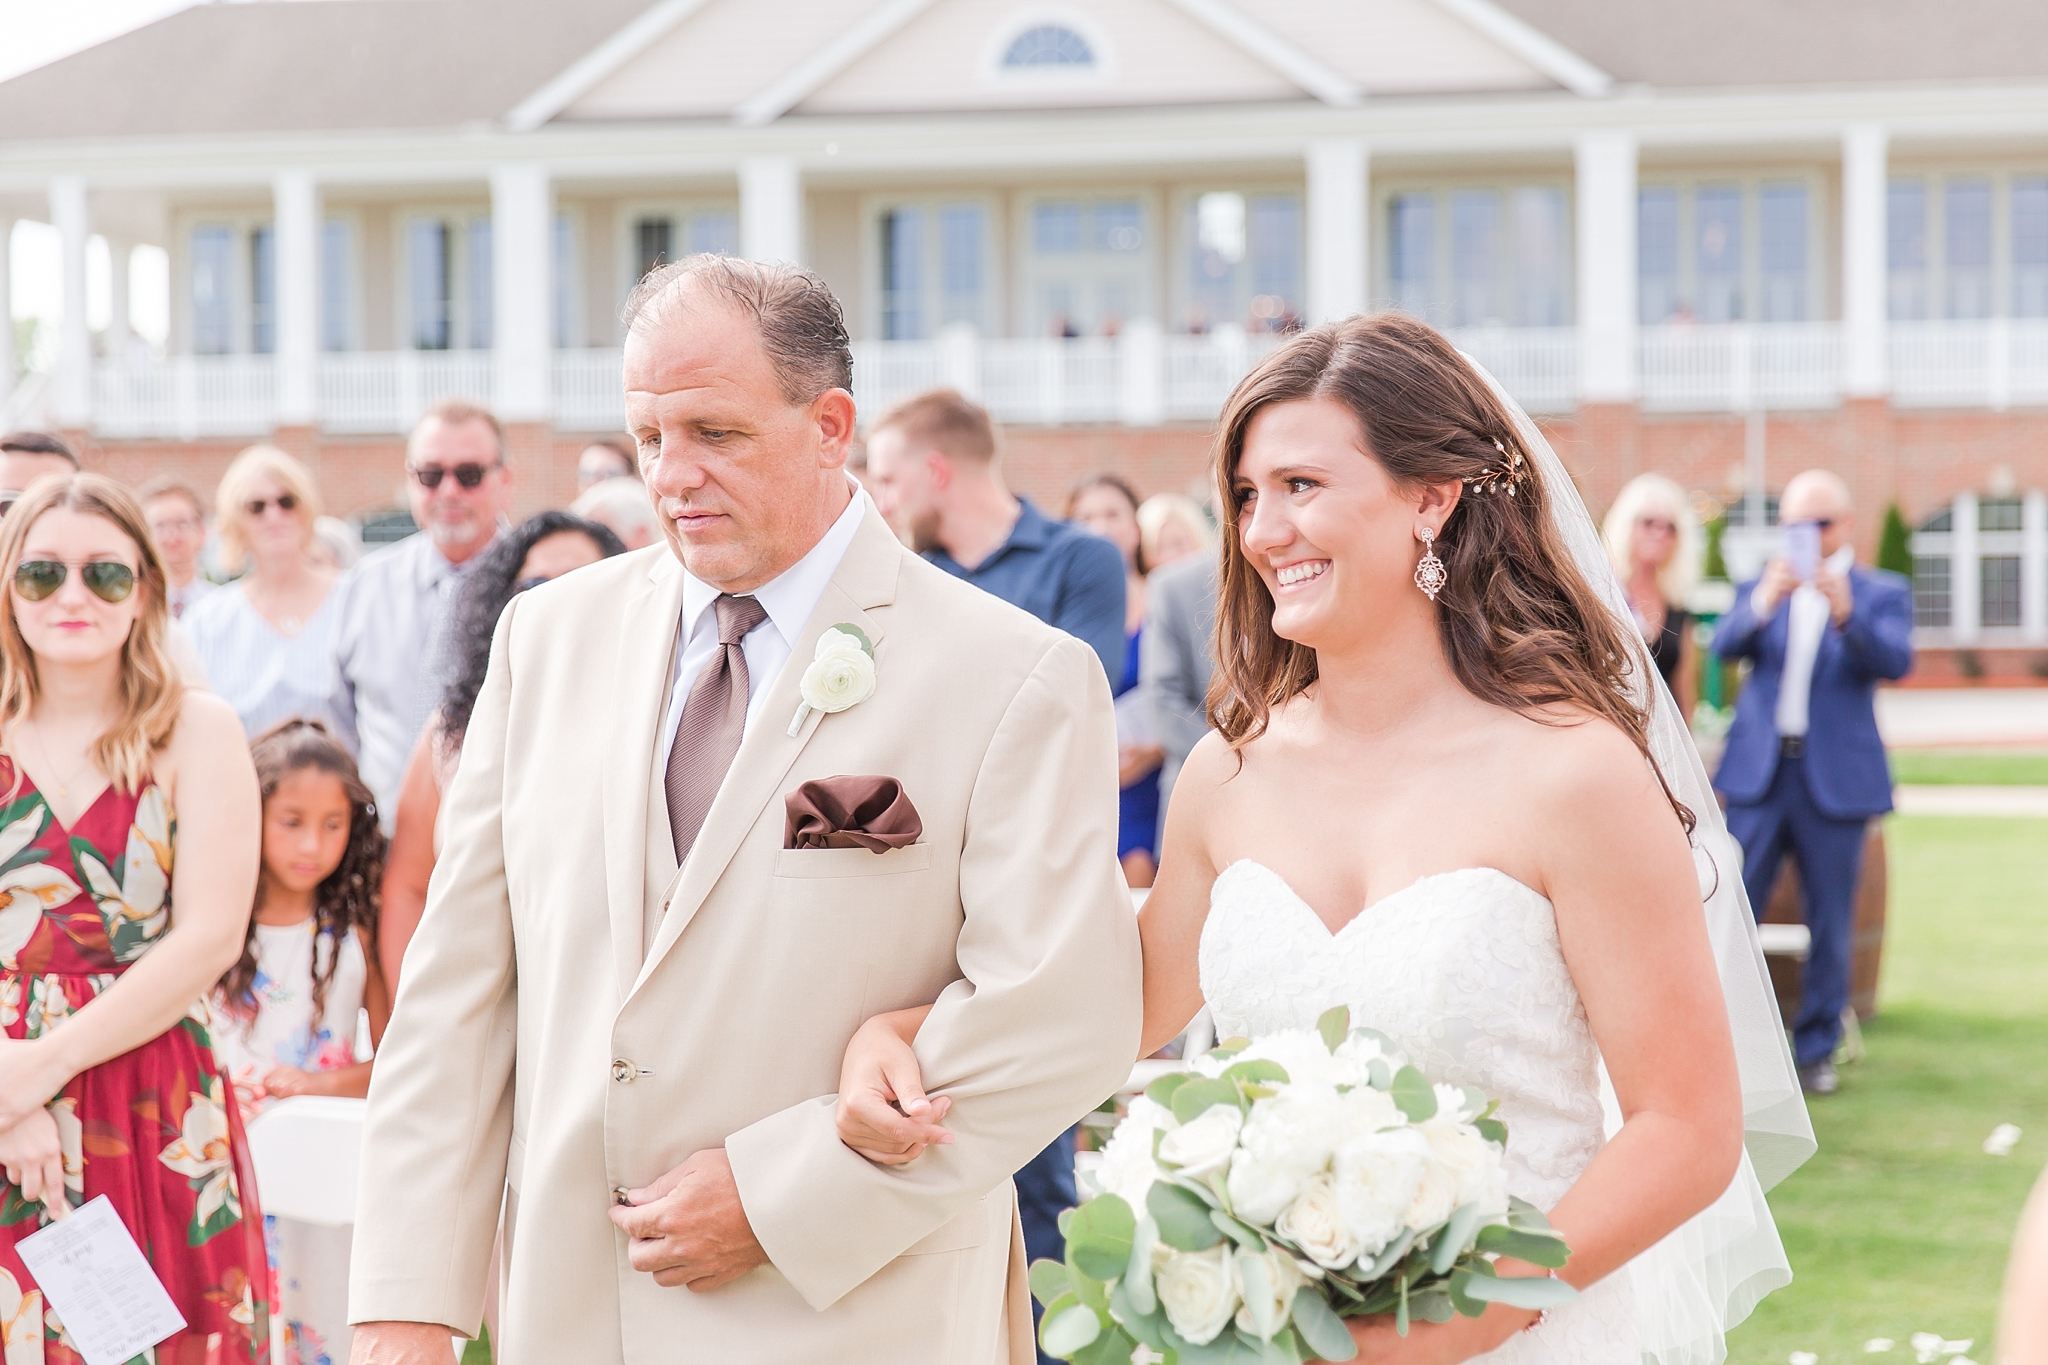 candid-timeless-wedding-photos-at-the-captains-club-in-grand-blanc-michigan-by-courtney-carolyn-photography_0038.jpg